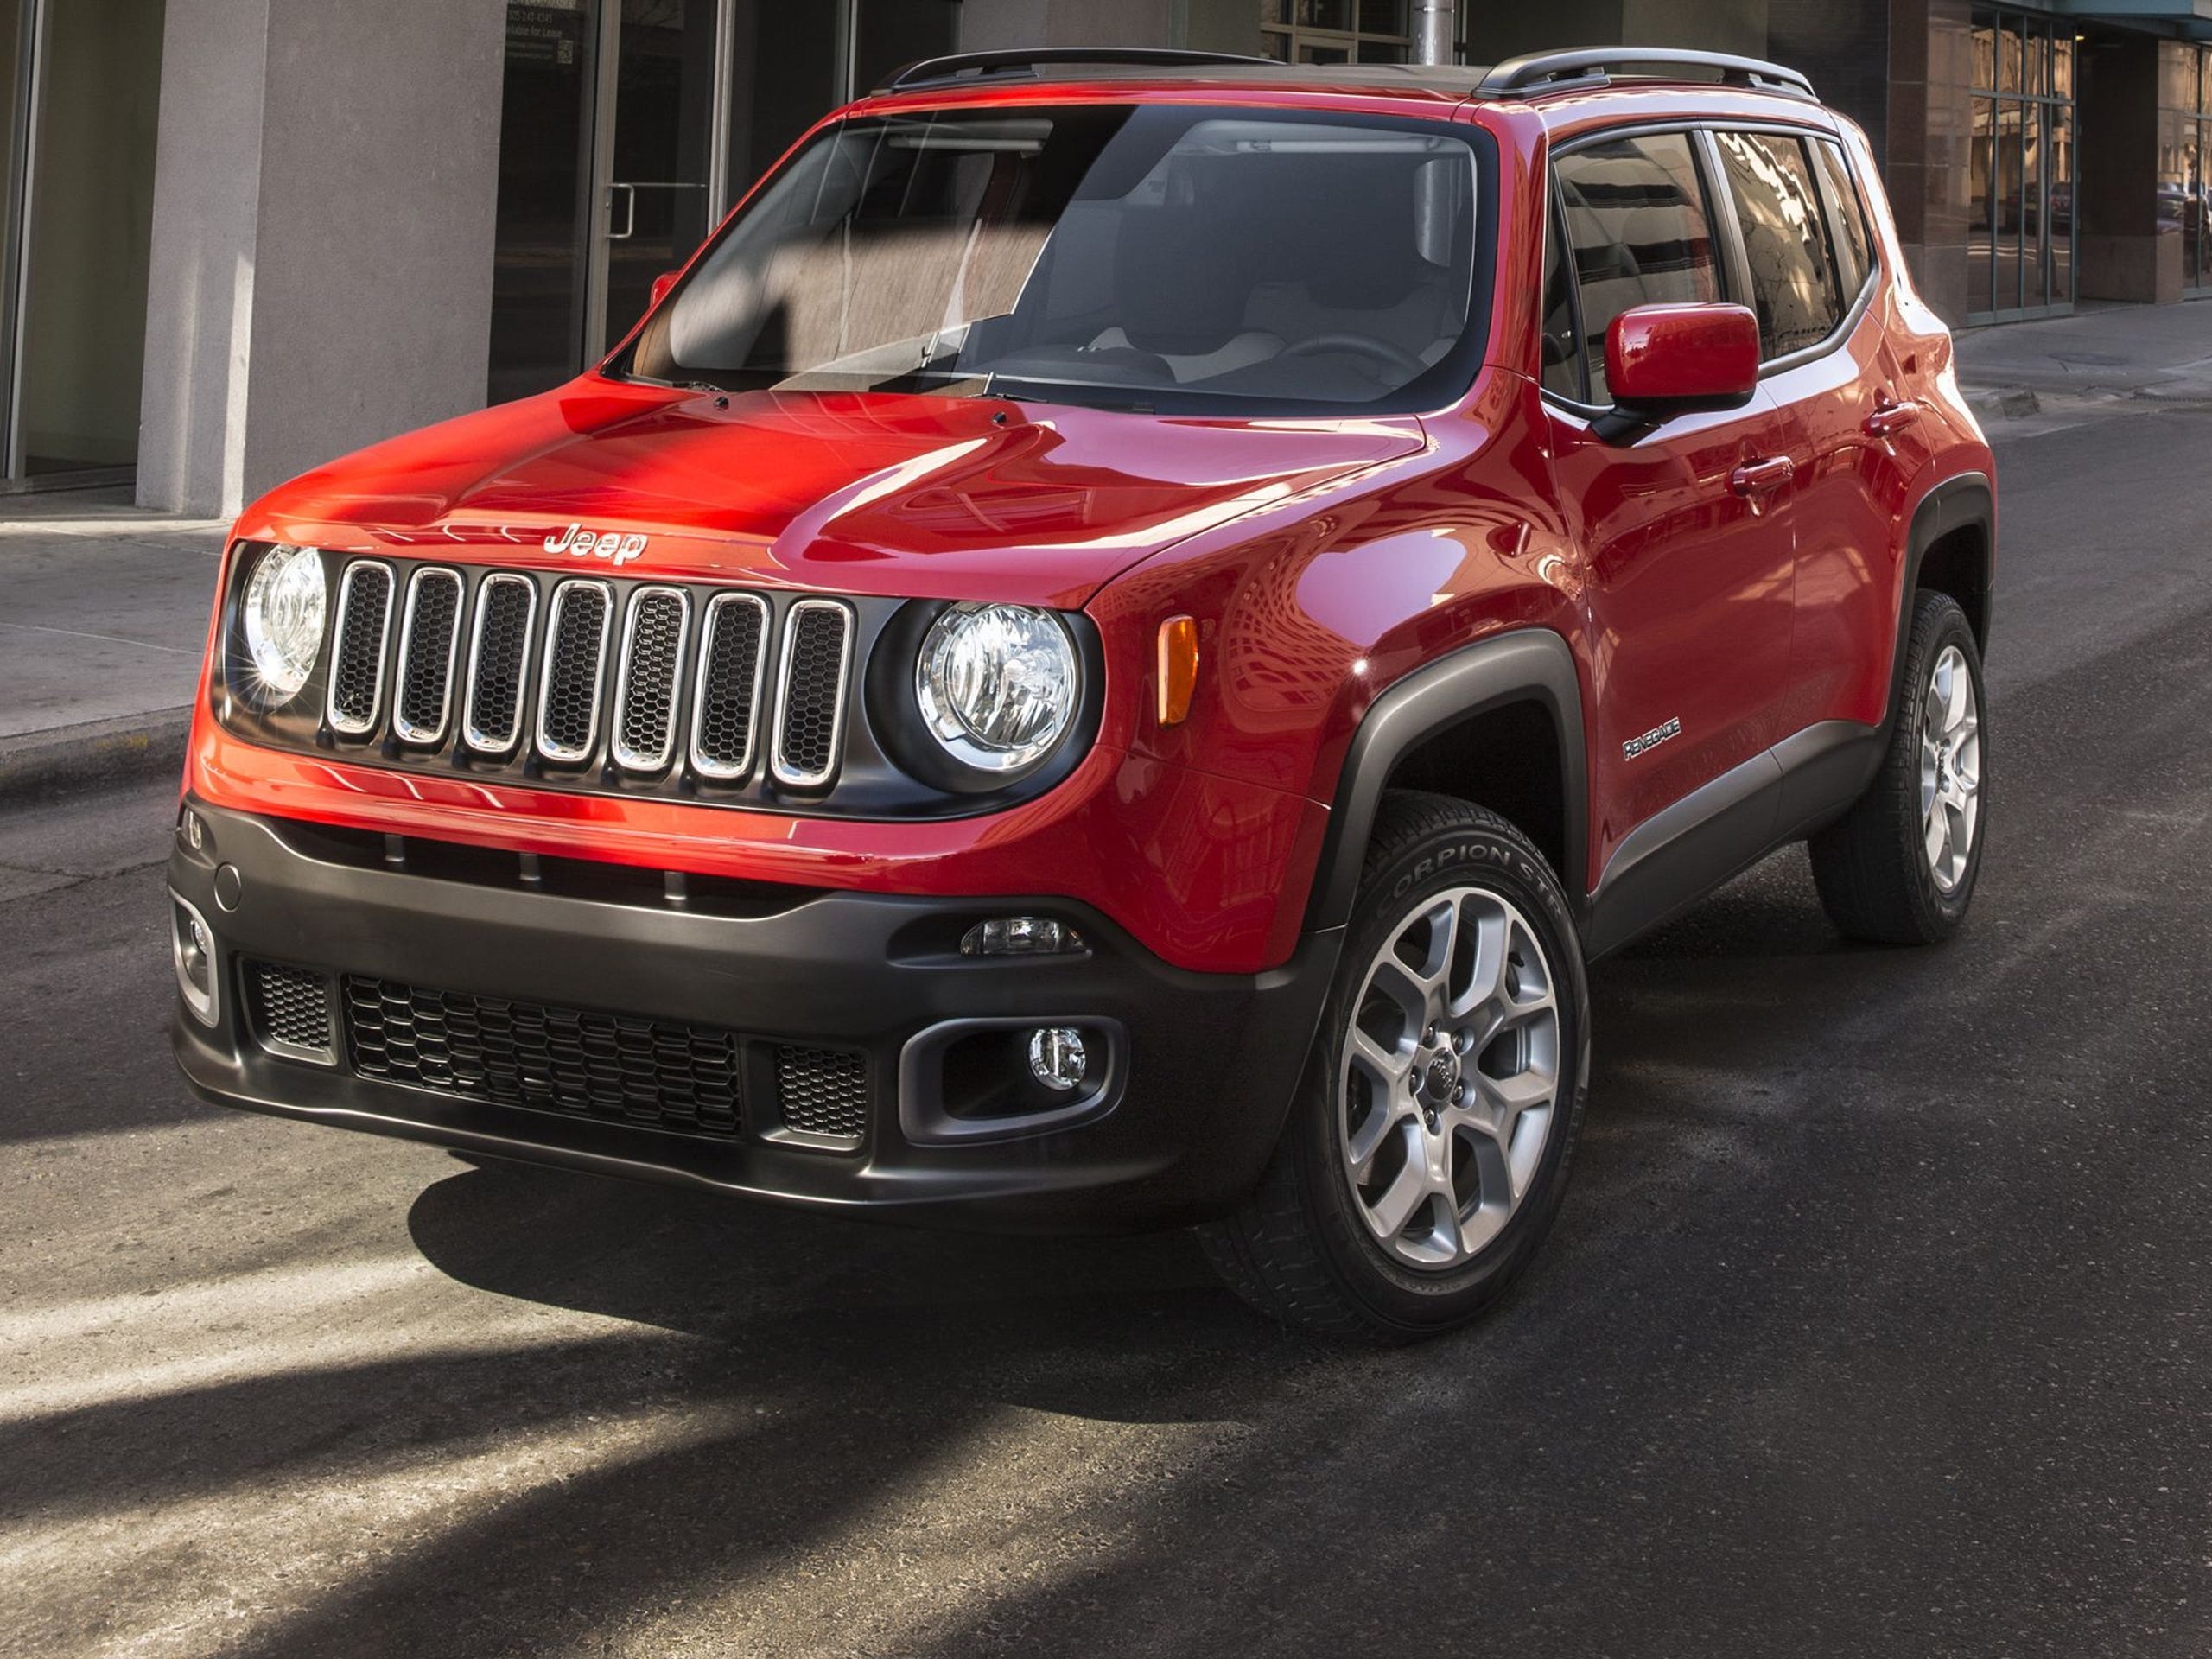 The 2015 Jeep Renegade marks the brand's first entry in the small sport-utility vehicle segment. By the end of the year, Jeeps will be produced on four continents and are expected to top the brand's record sales of more than 1 million vehicles in 2014.